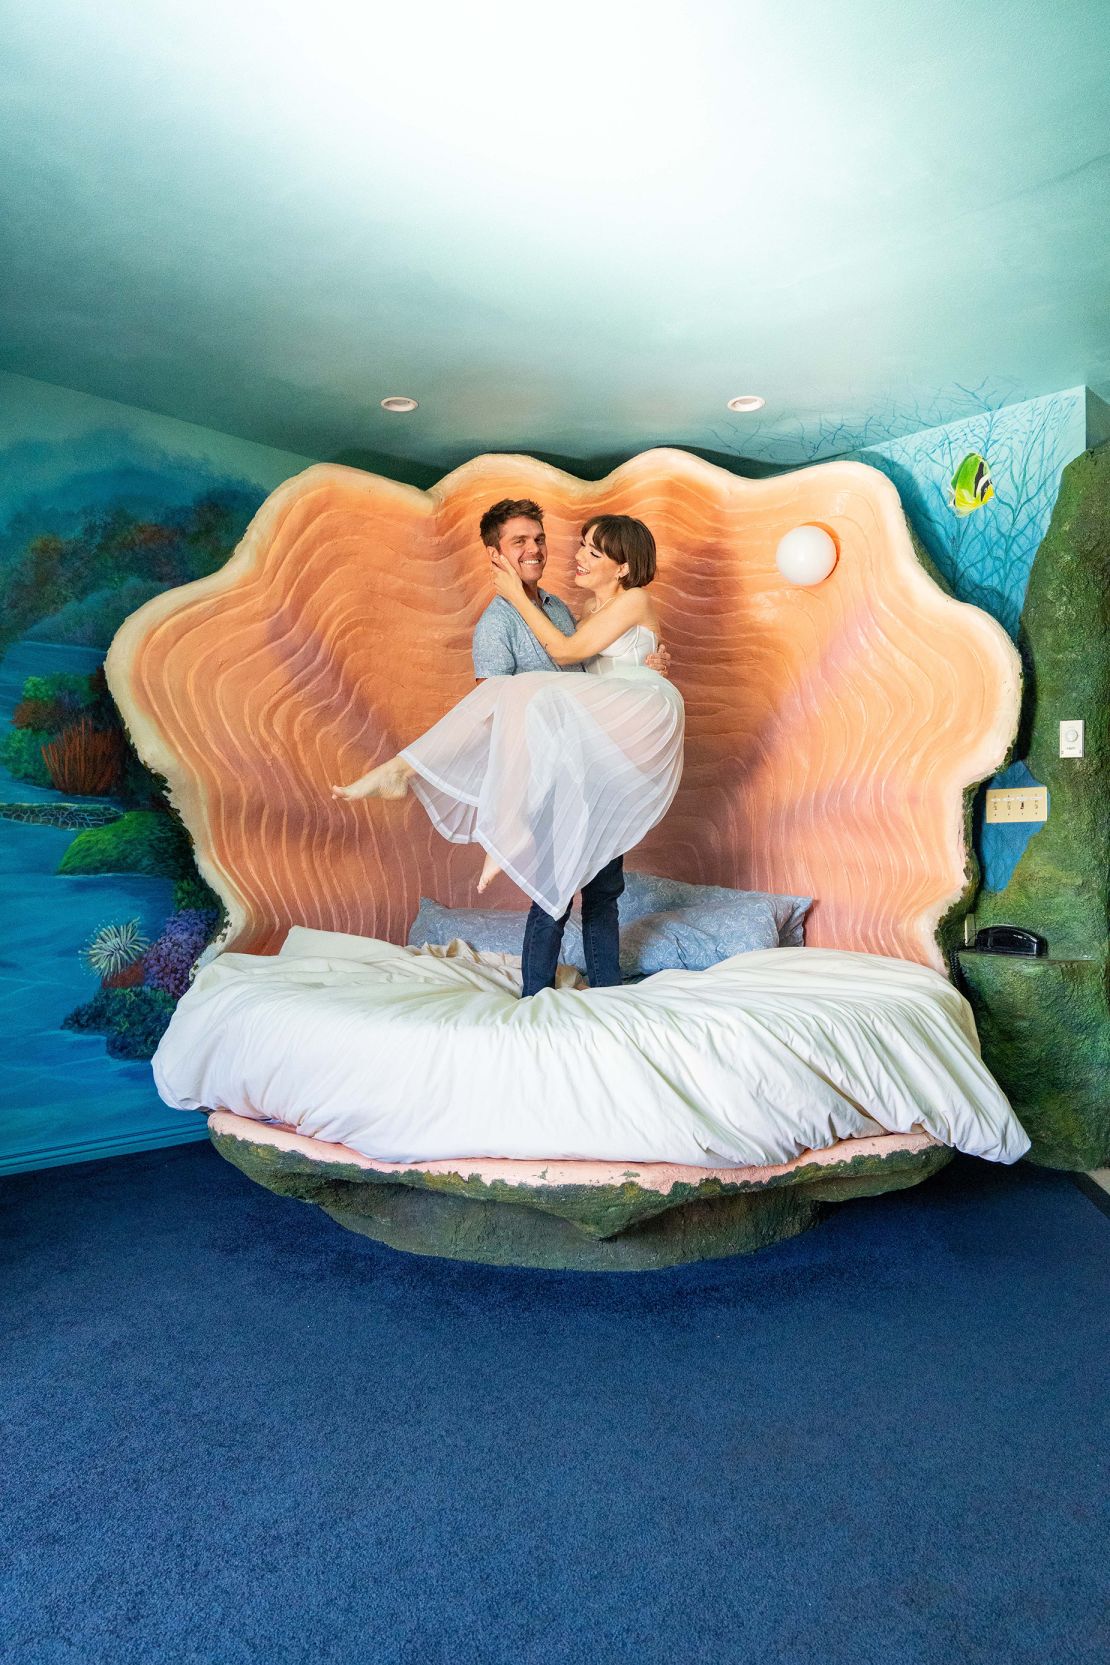 Here's Margaret and Corey posing in the Sea Cave Suite at the Black Swan Inn in Idaho.